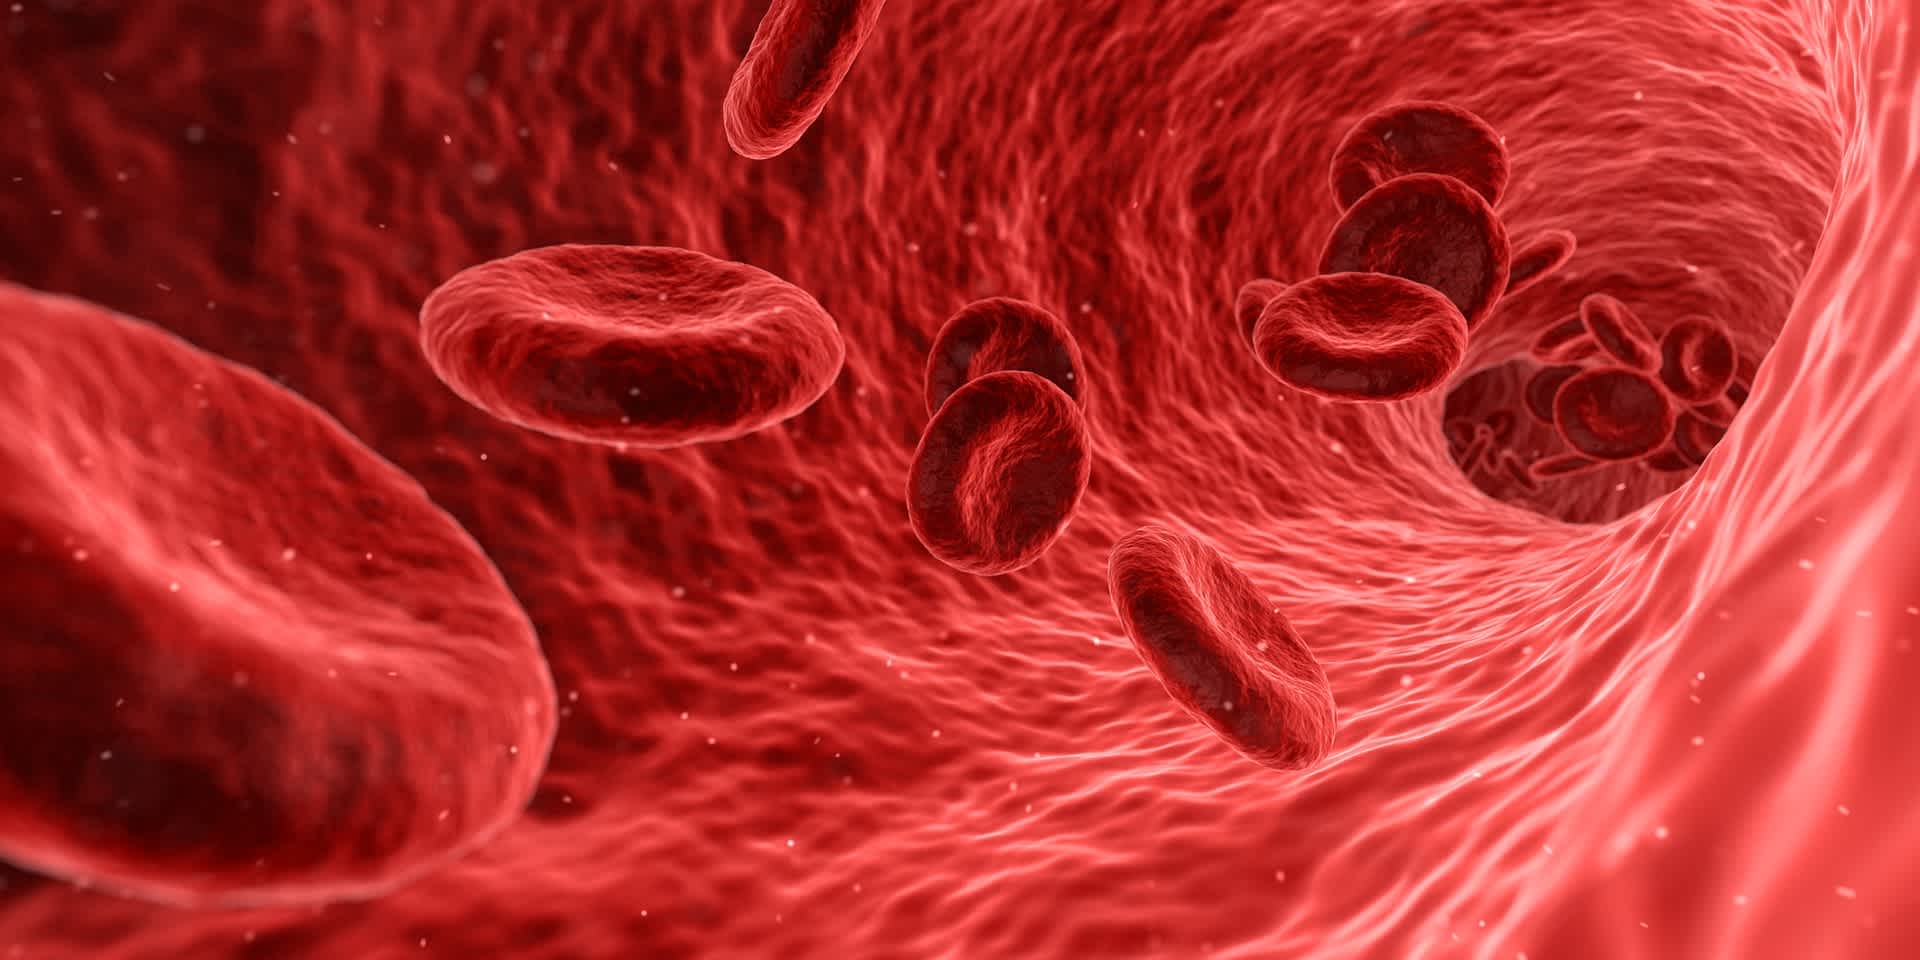 Illustration of red blood cells to highlight complete blood count